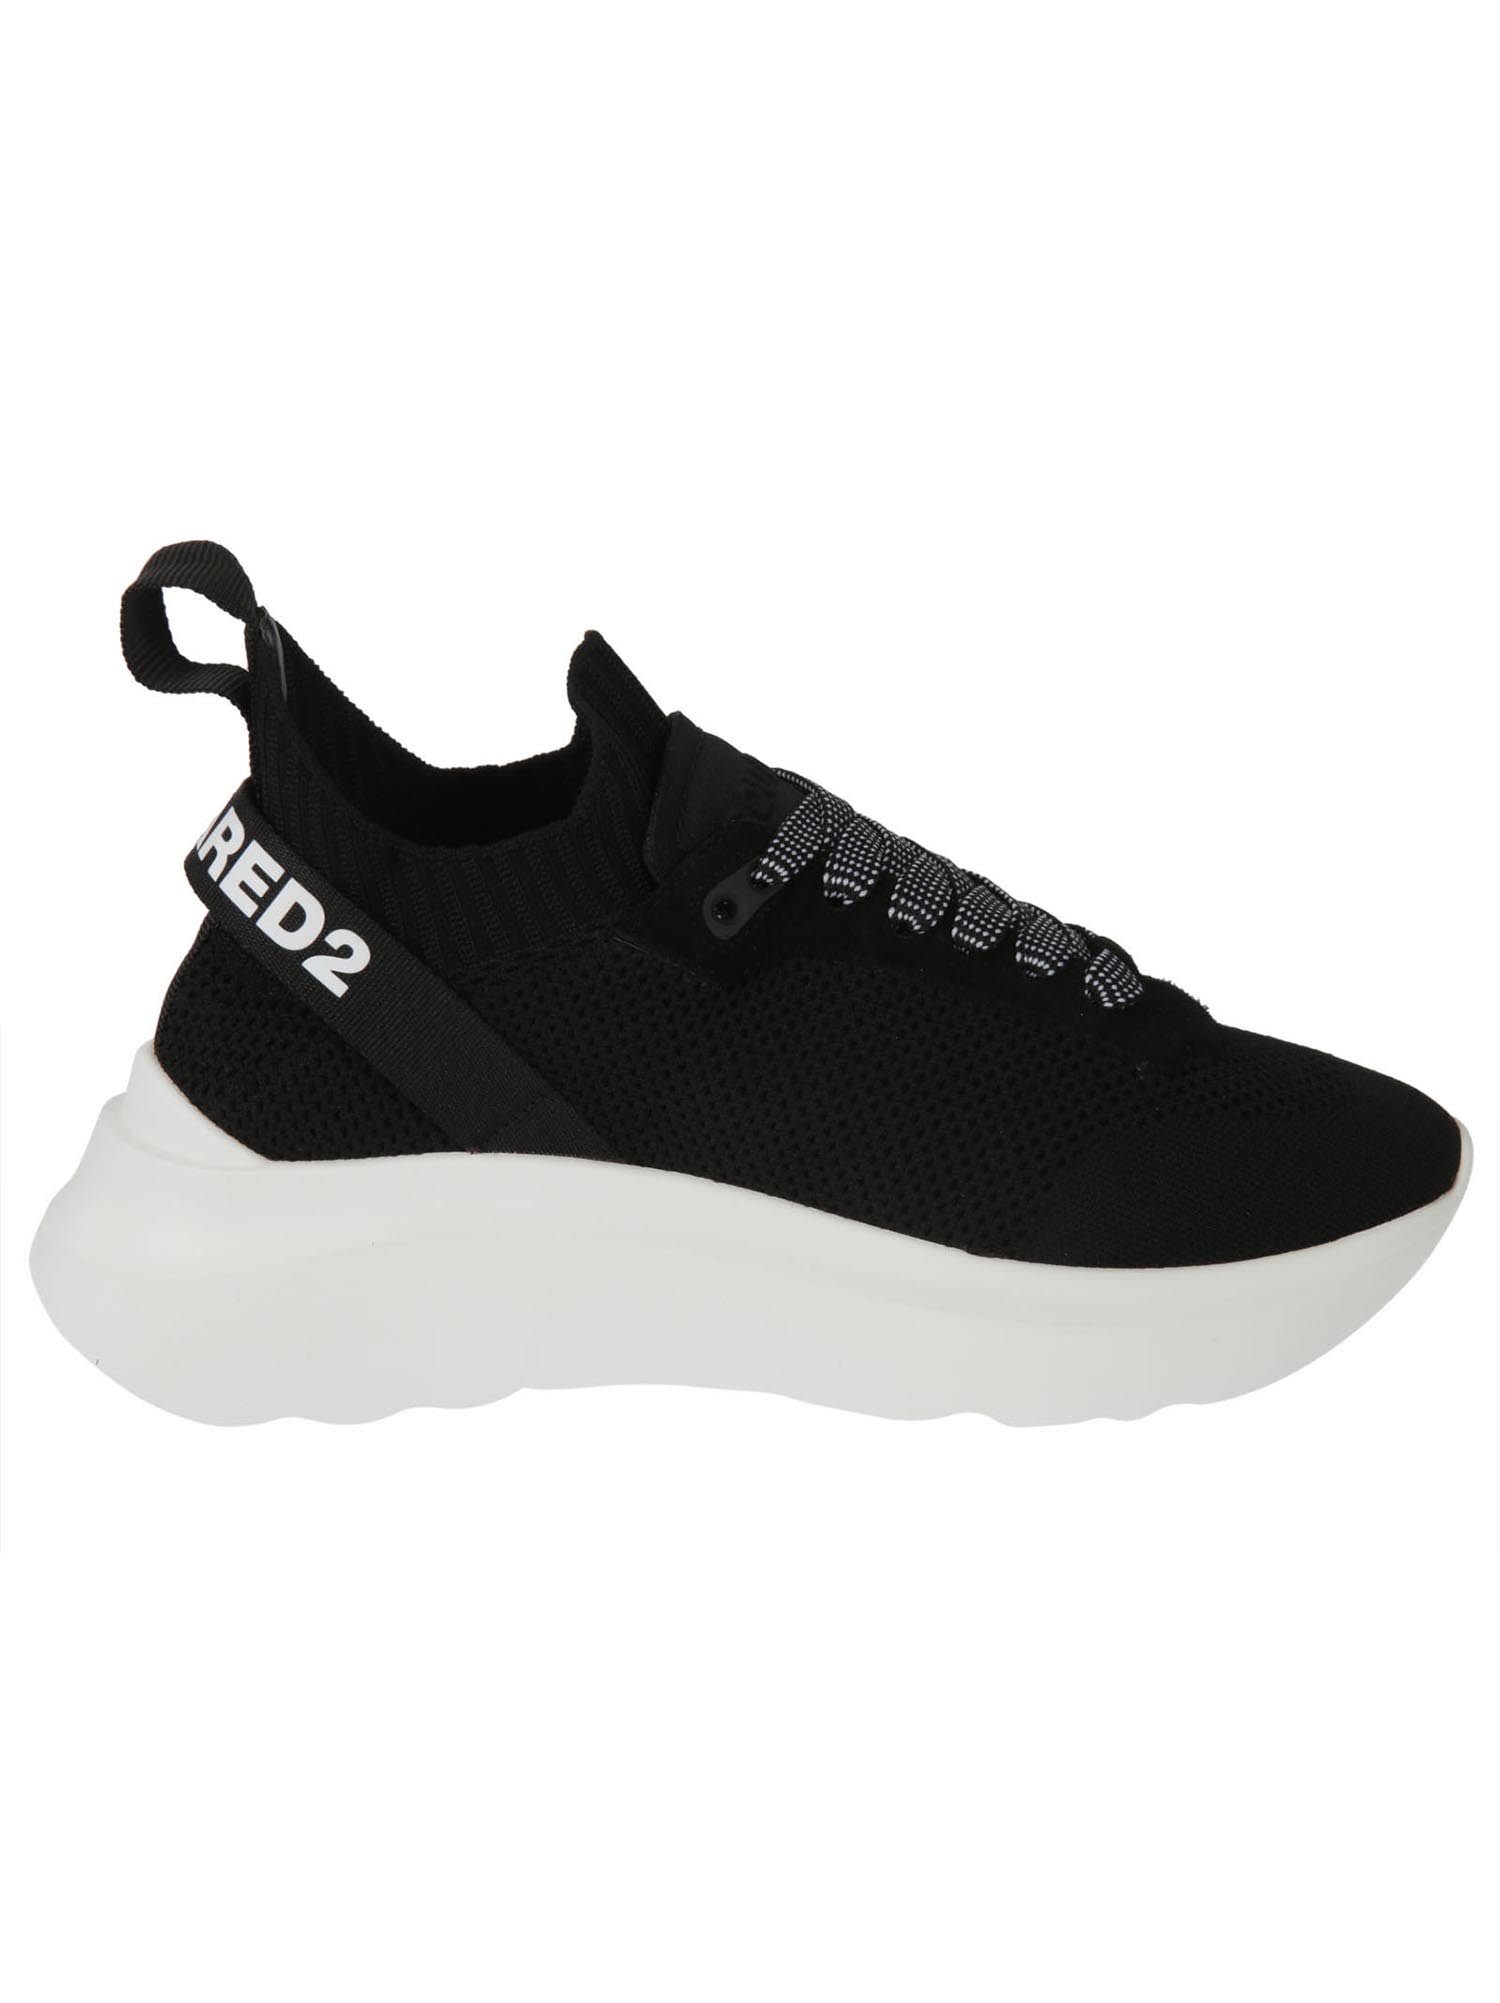 dsquared2 low sneakers